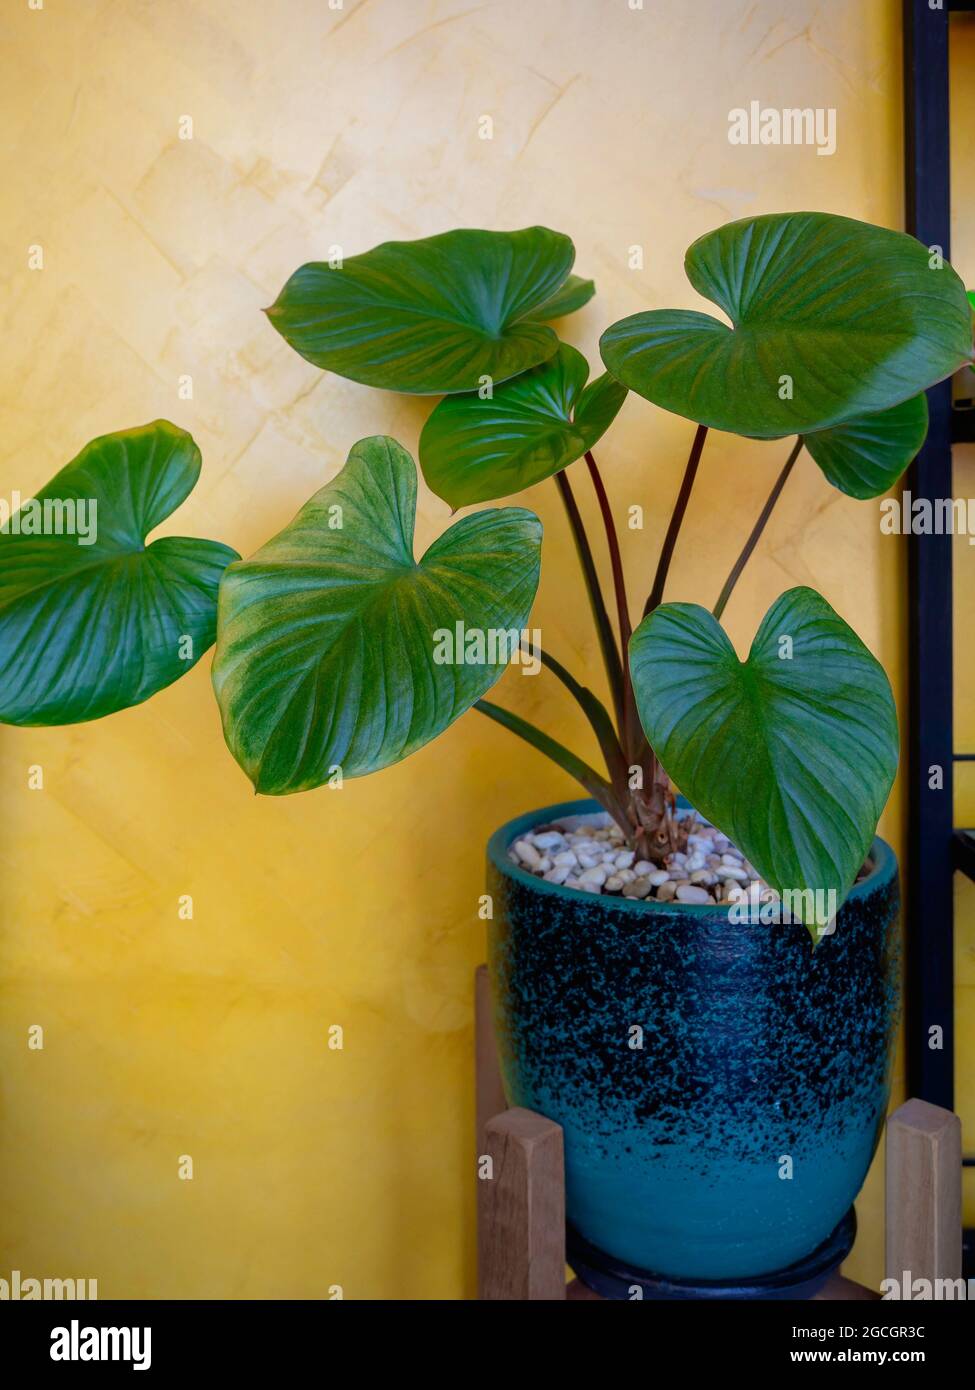 Homalomena lindenii (Rodigas), Beautiful green tropical palm leaves in blue ceramic pot at the room corner on yellow wall background, vertical style. Stock Photo